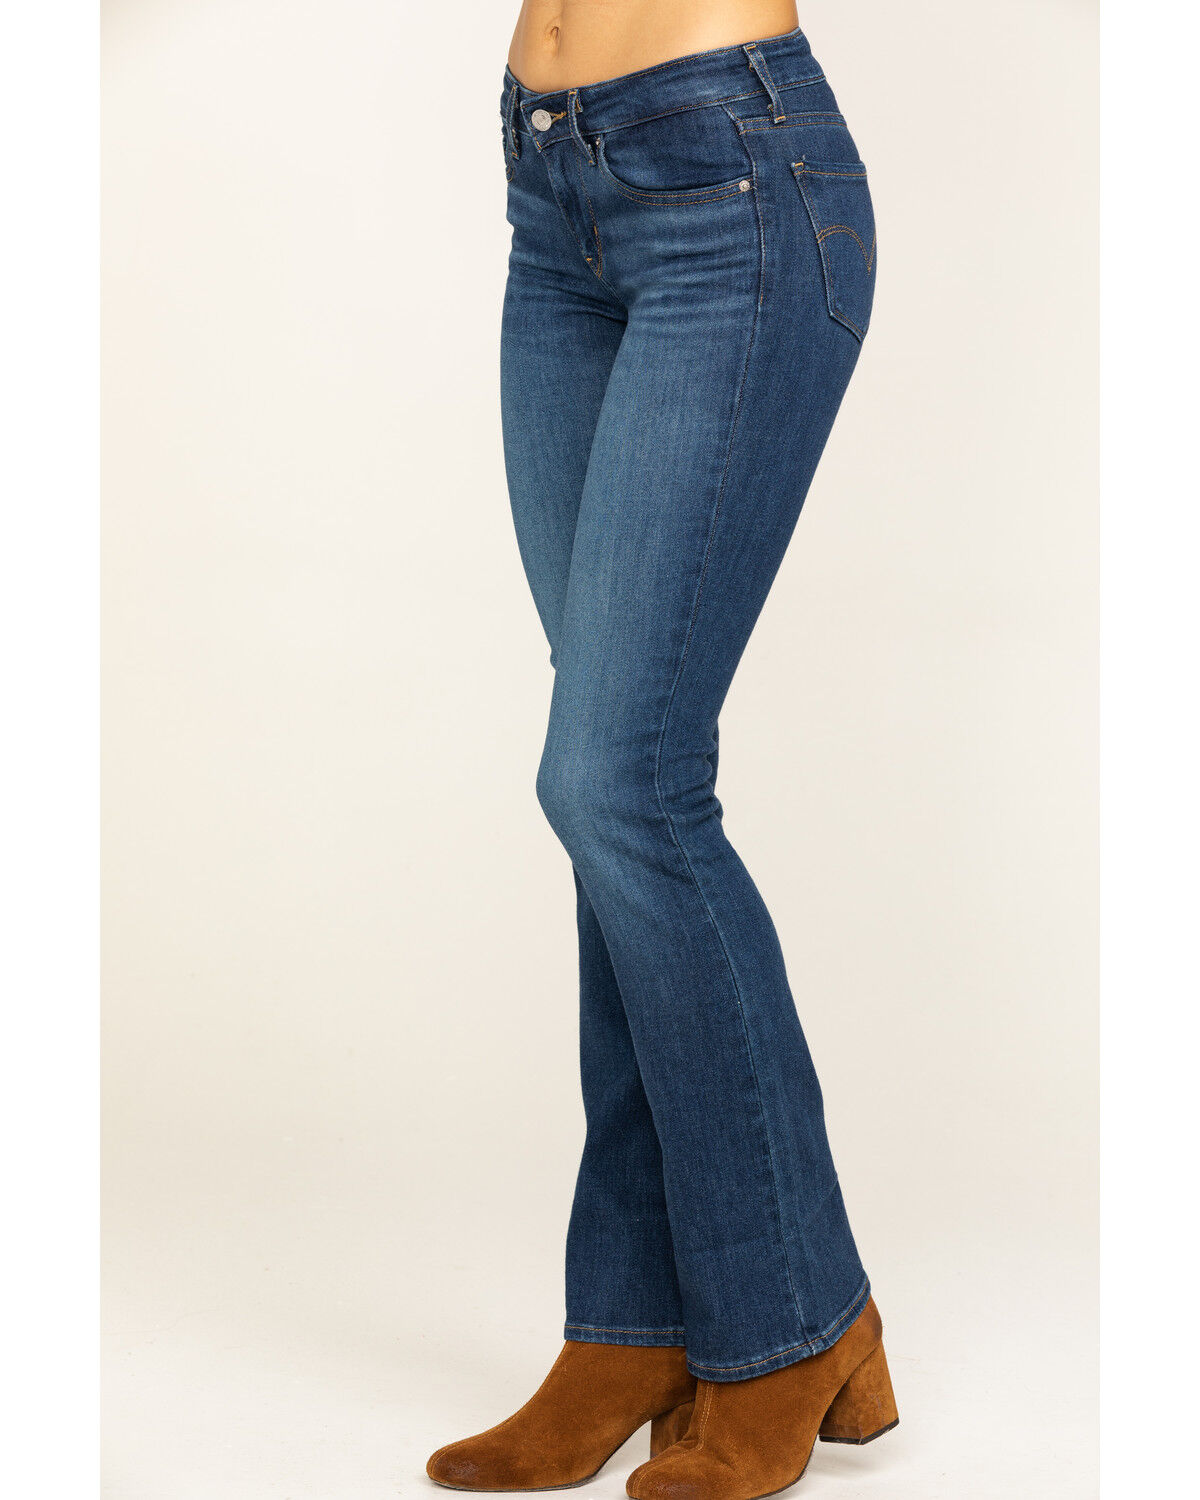 levi's 715 bootcut womens jeans